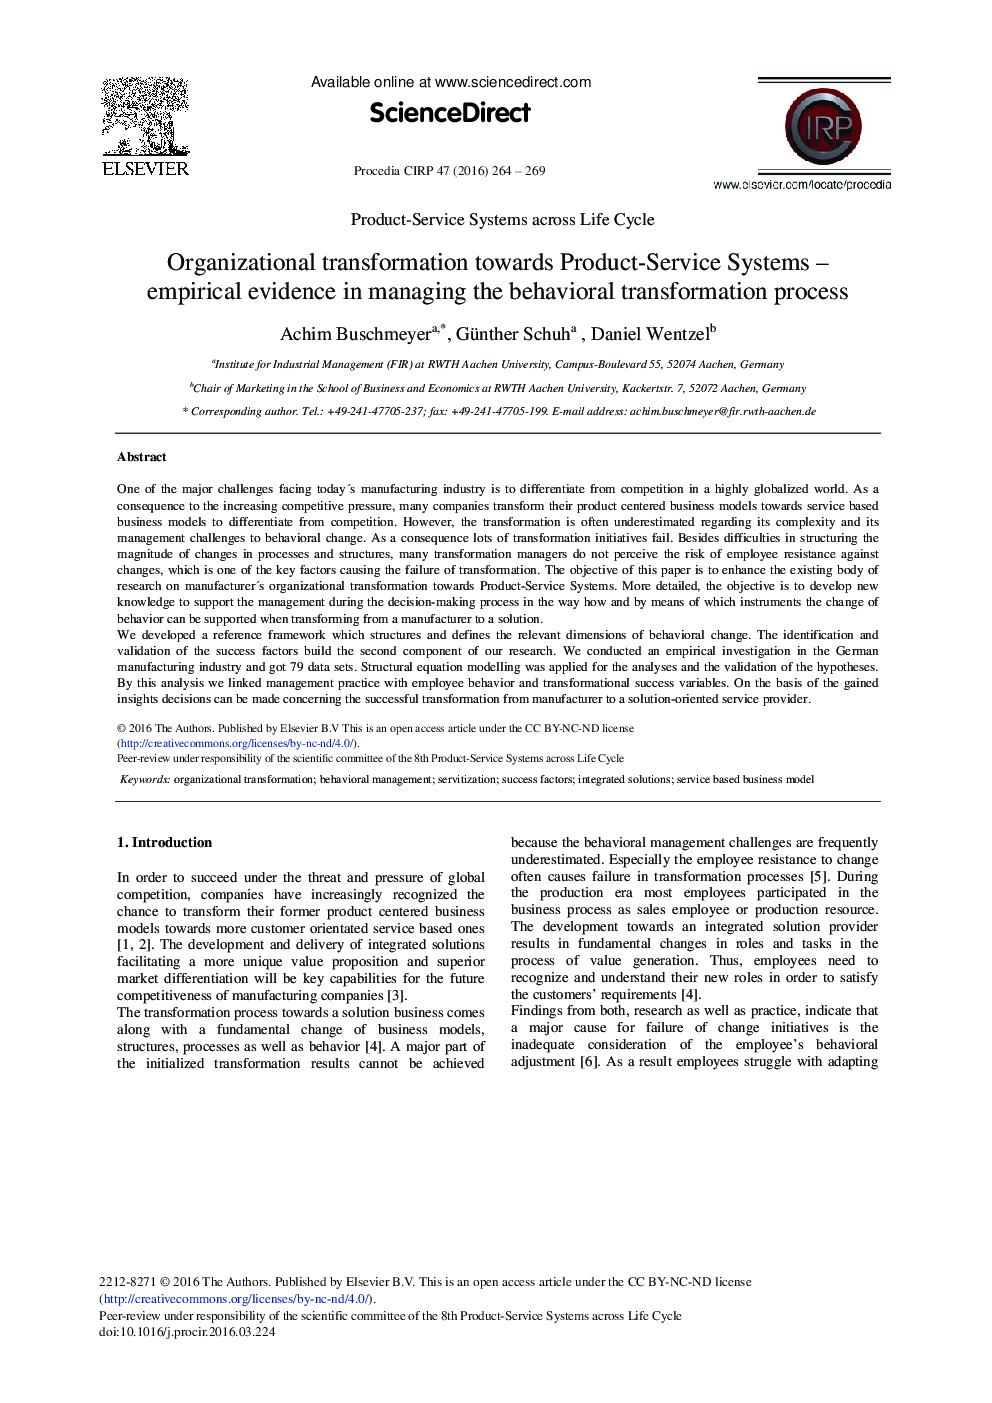 Organizational Transformation Towards Product-service Systems – Empirical Evidence in Managing the Behavioral Transformation Process 